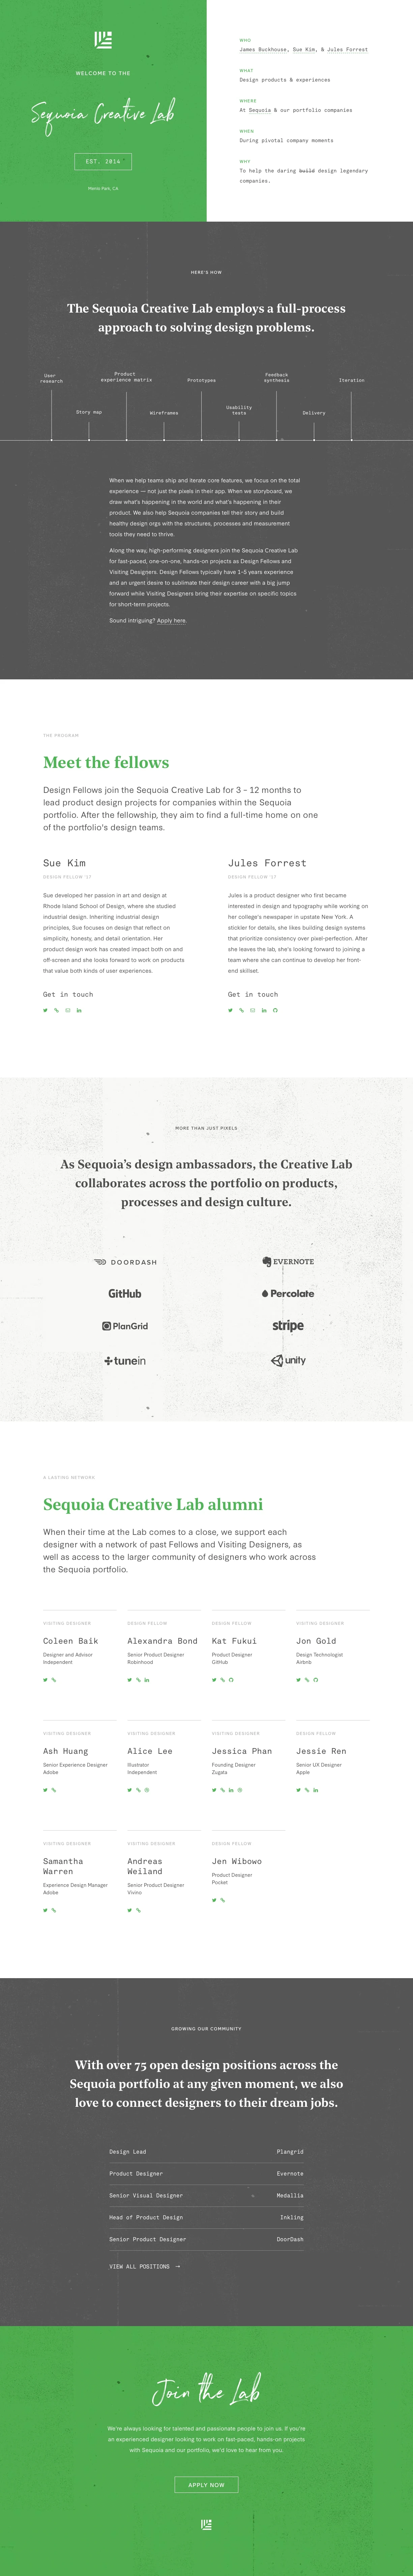 Sequoia Creative Lab Landing Page Example: The Sequoia Creative Lab designs products and experiences for Sequoia and its portfolio.